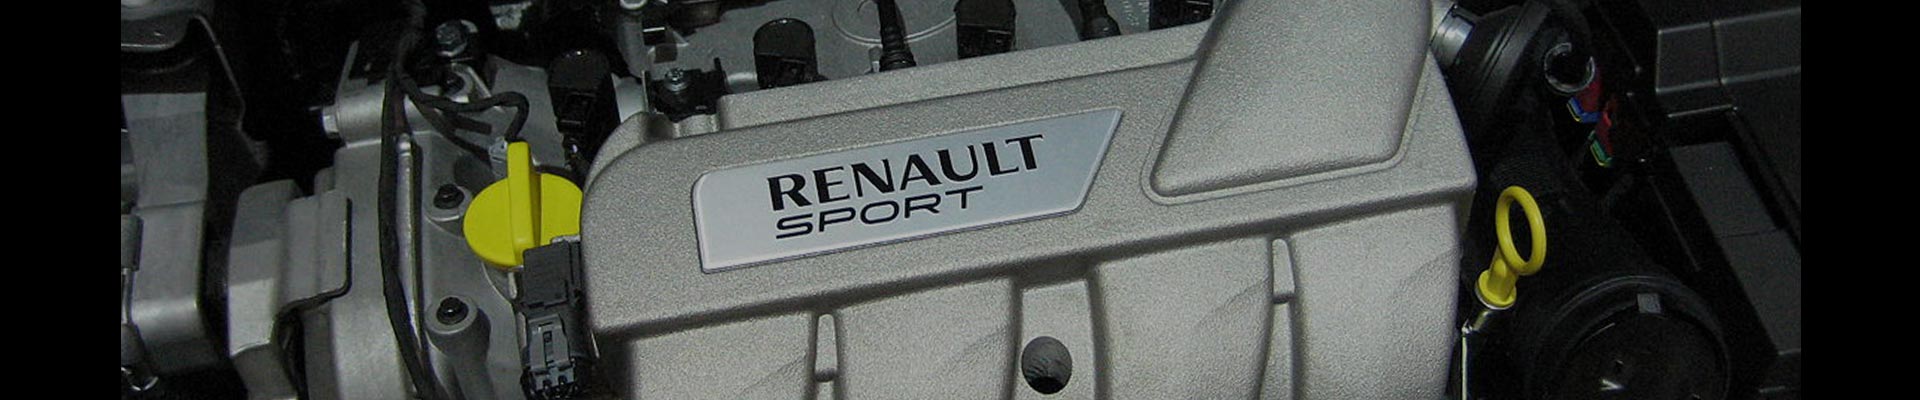 Shop Replacement 1985 Renault Encore Parts with Discounted Price on the Net